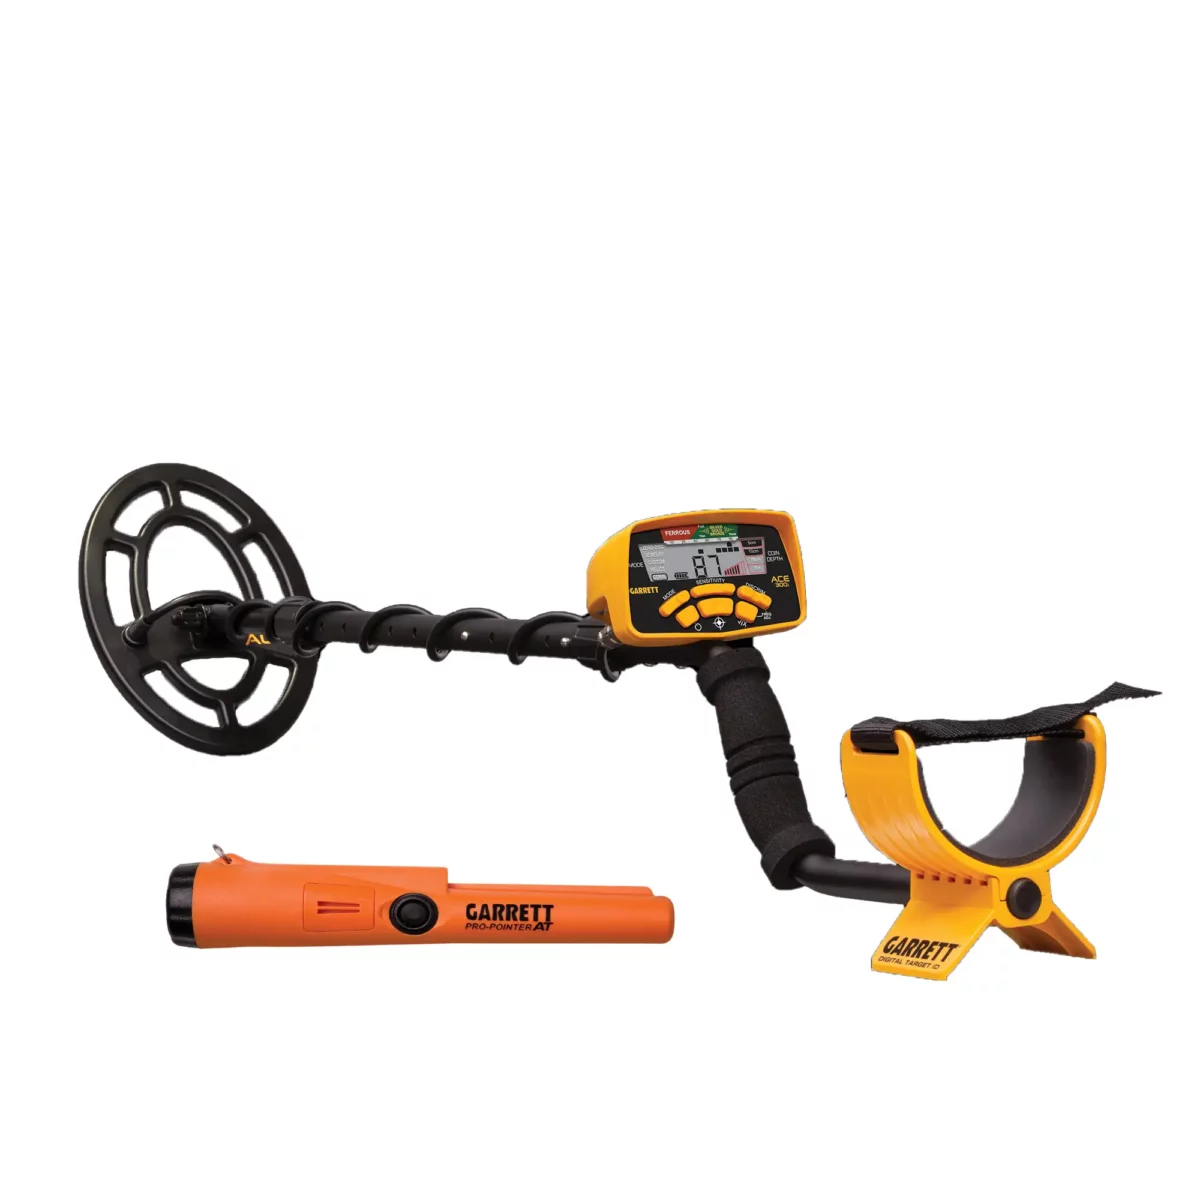 Garrett ACE 300i Metal Detector with FREE Pro-Pointer AT